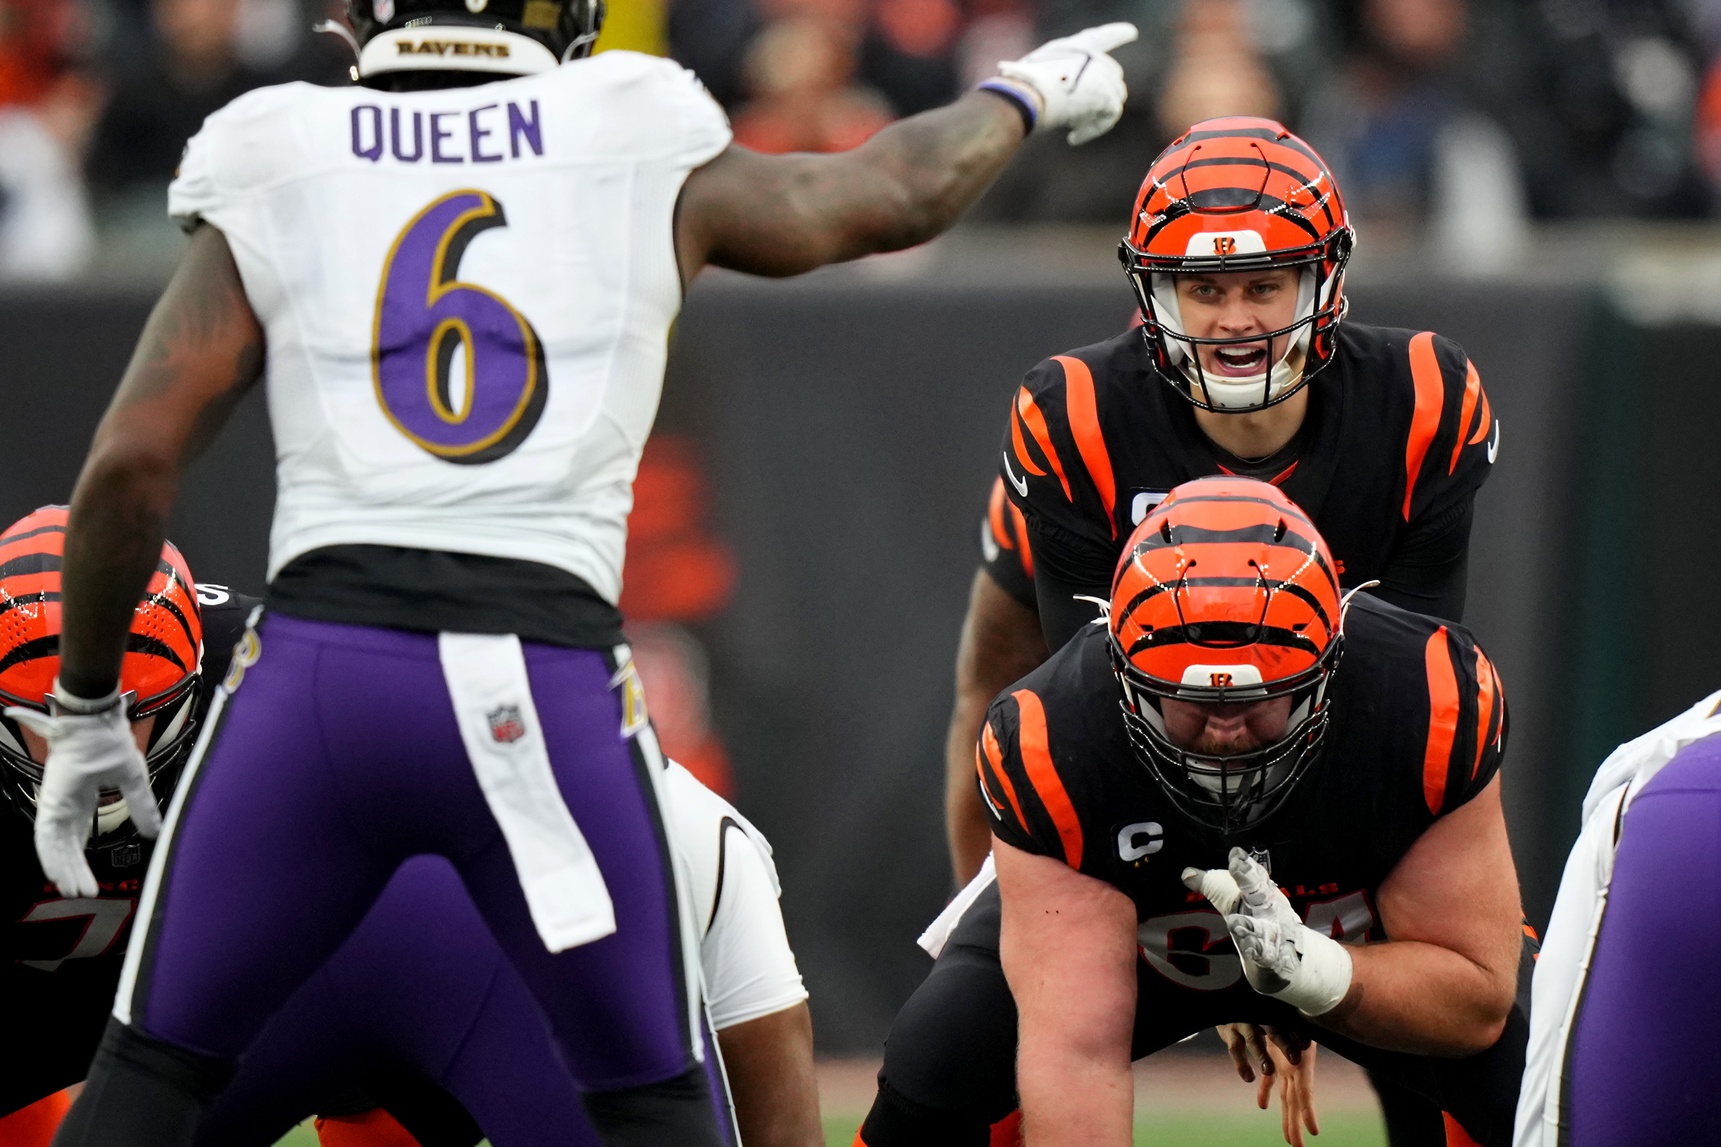 Ravens vs. Bengals How To Watch, Start Time, Streaming, Betting